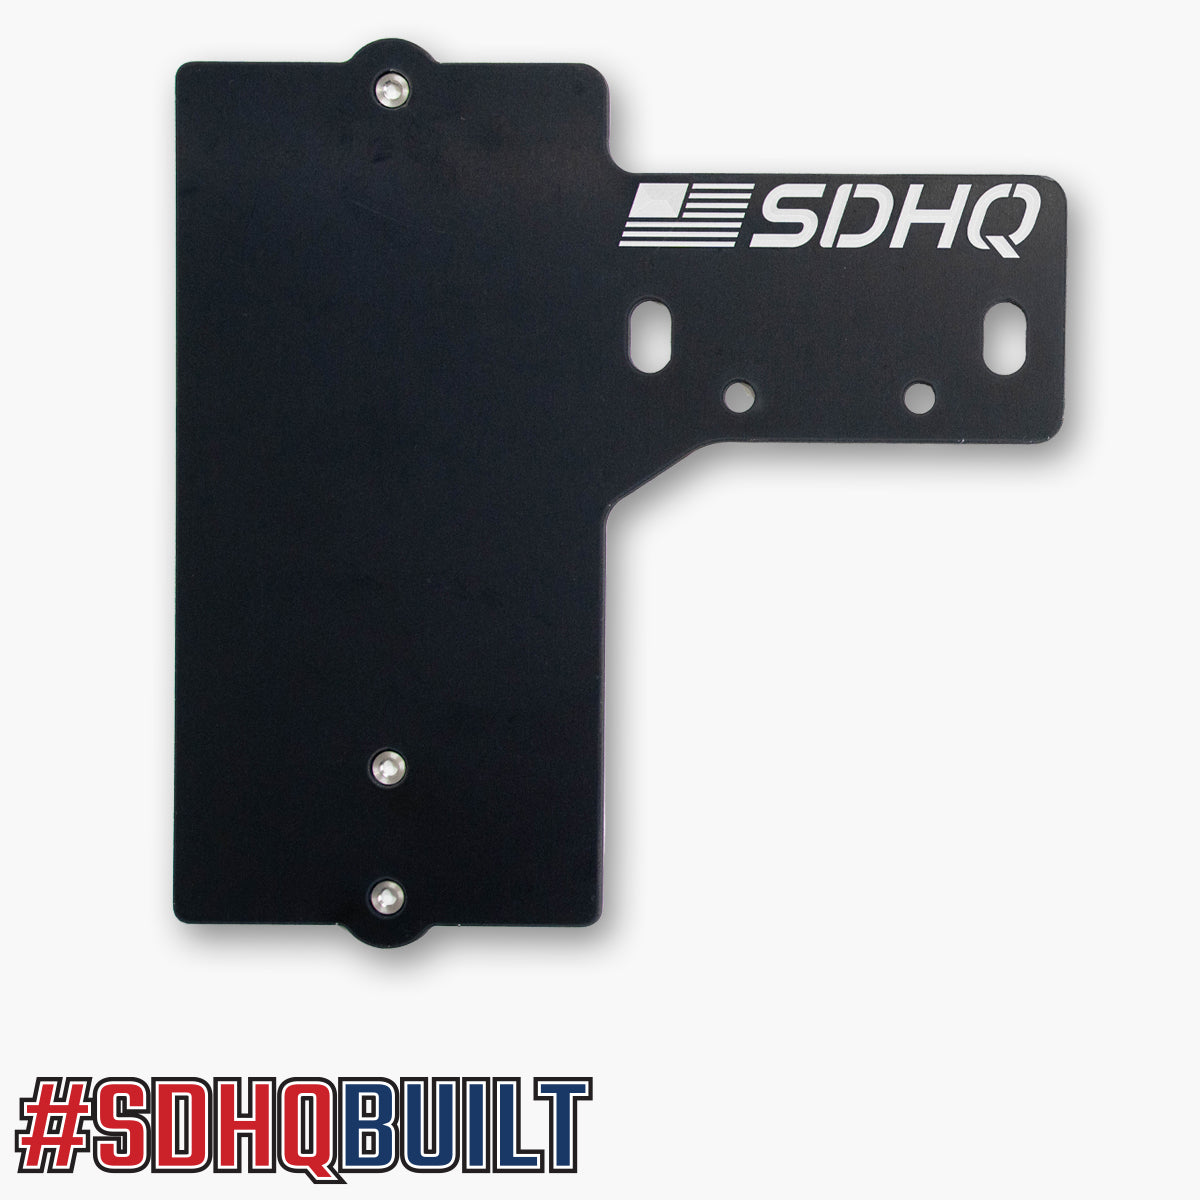 '05-23 Toyota Tacoma SDHQ Built Switch-Pros Power Module Mount Lighting SDHQ Off Road individual part display